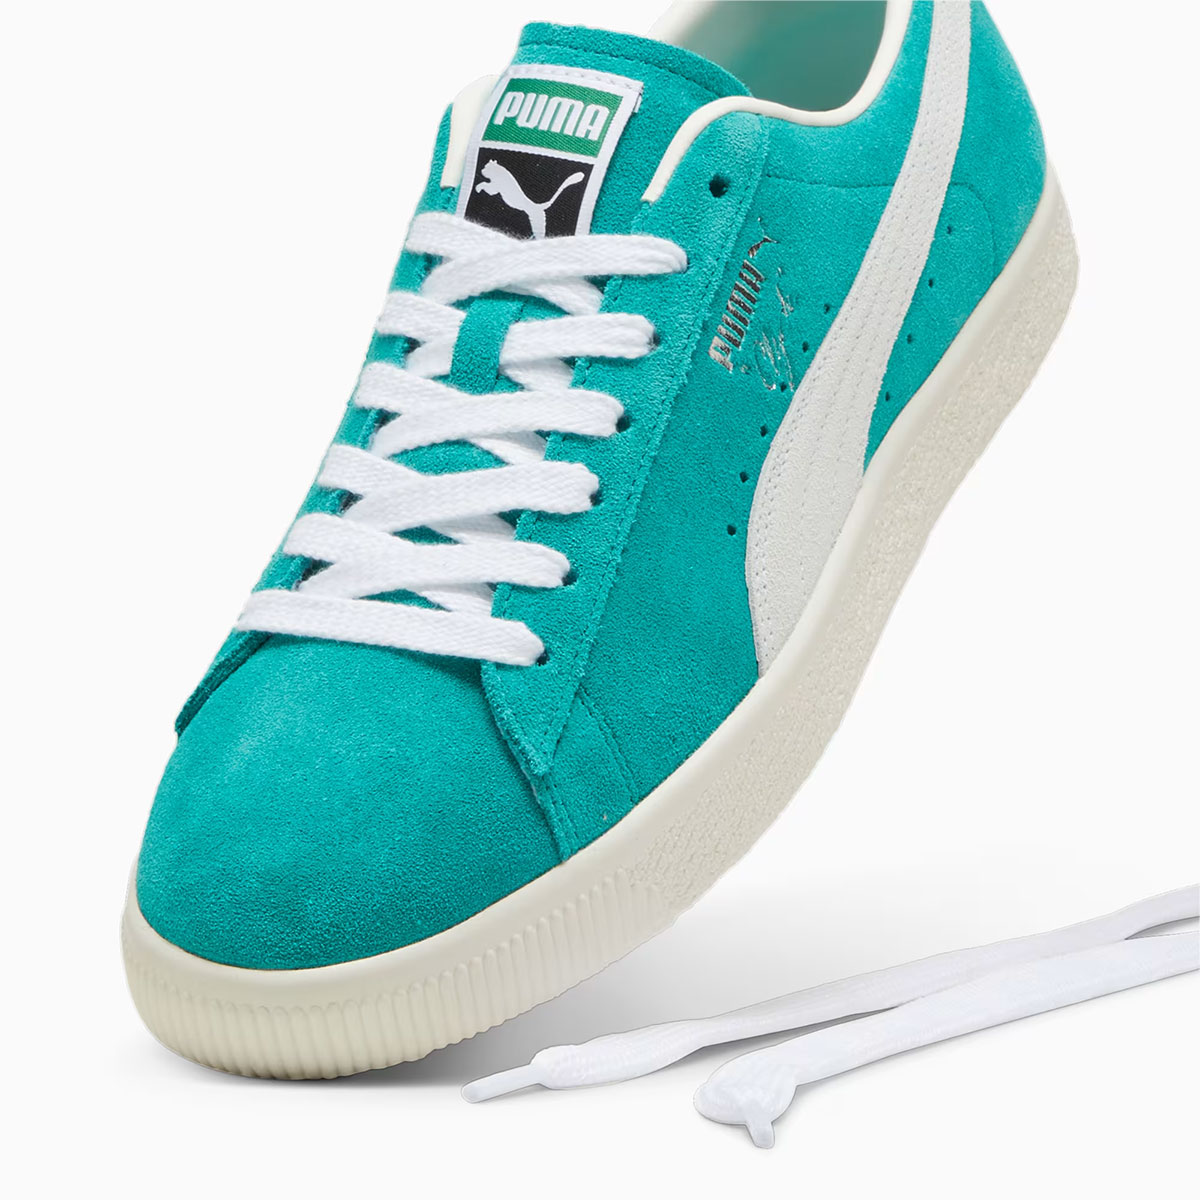 Puma Clyde Og Spectra Green Frosted Ivory 391962 13 6